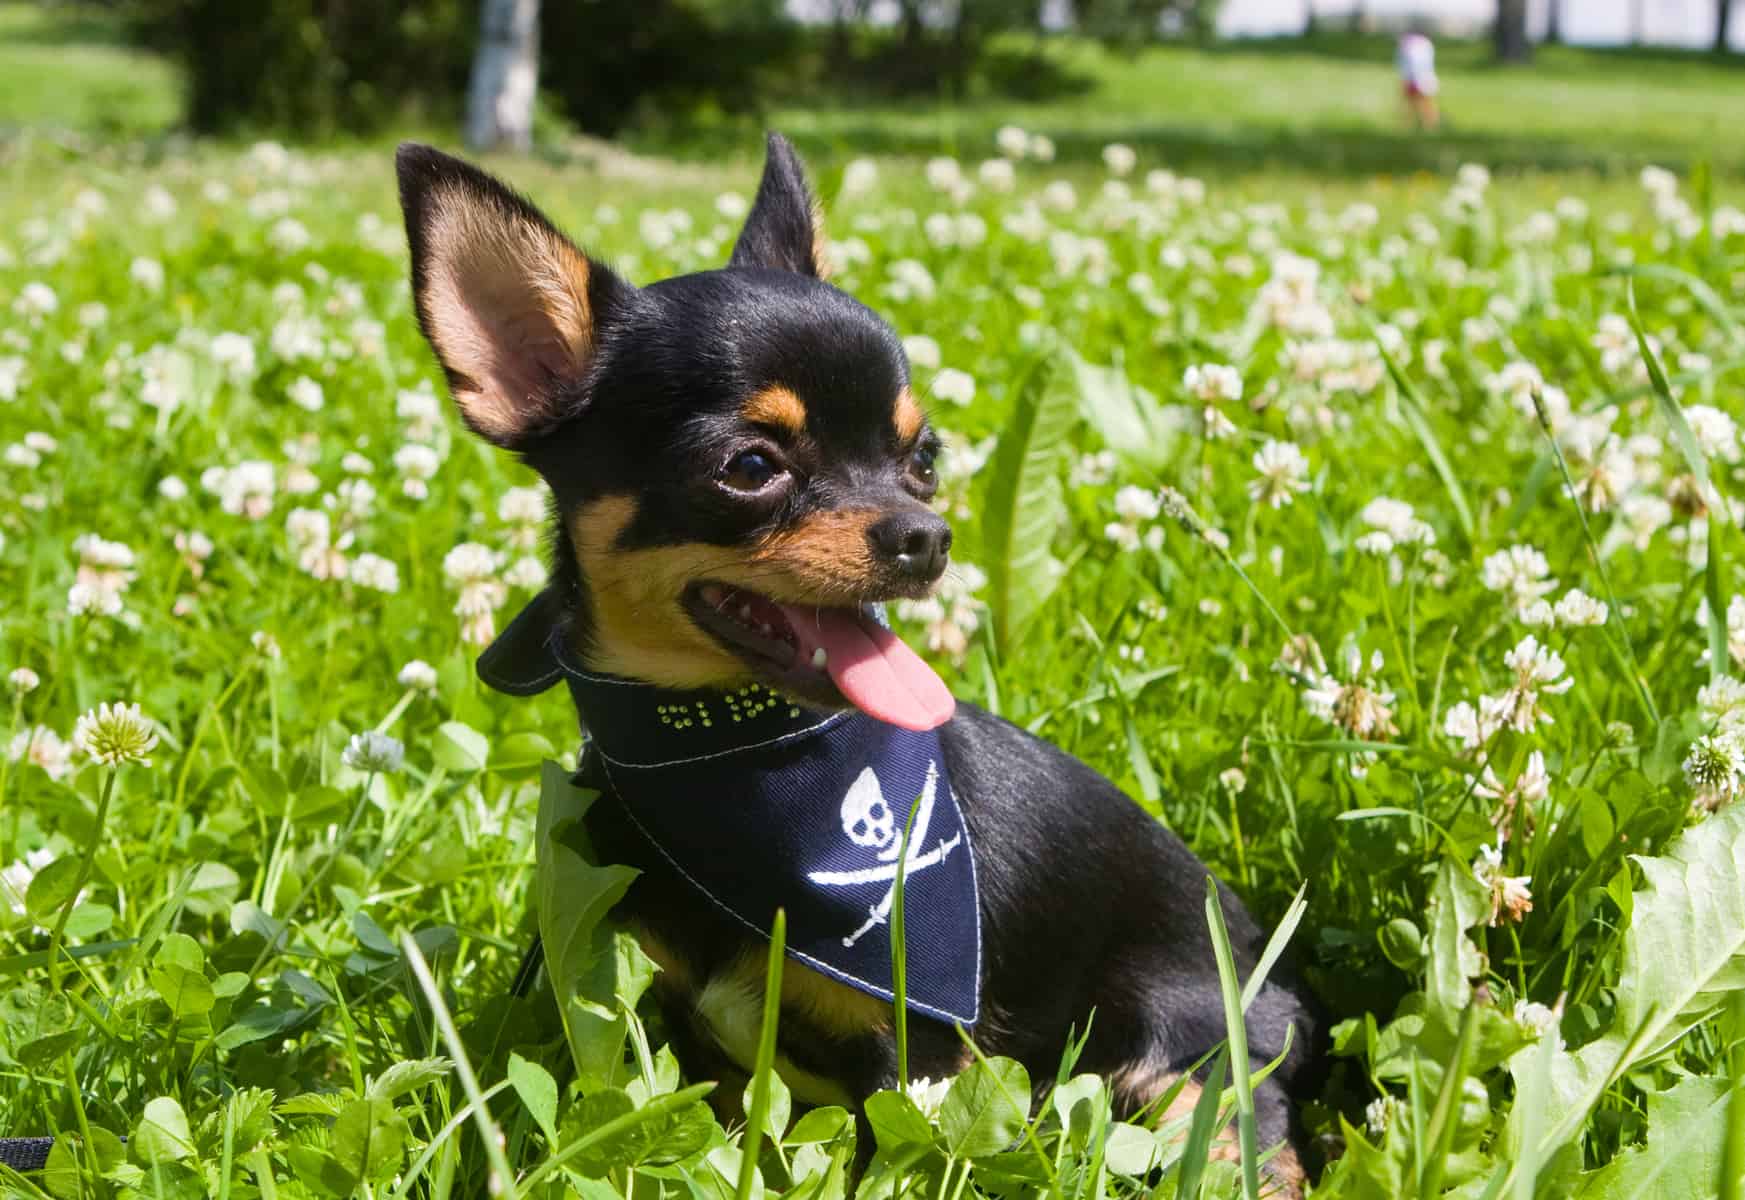 A tiny Chihuahua smiling and staying on the grass